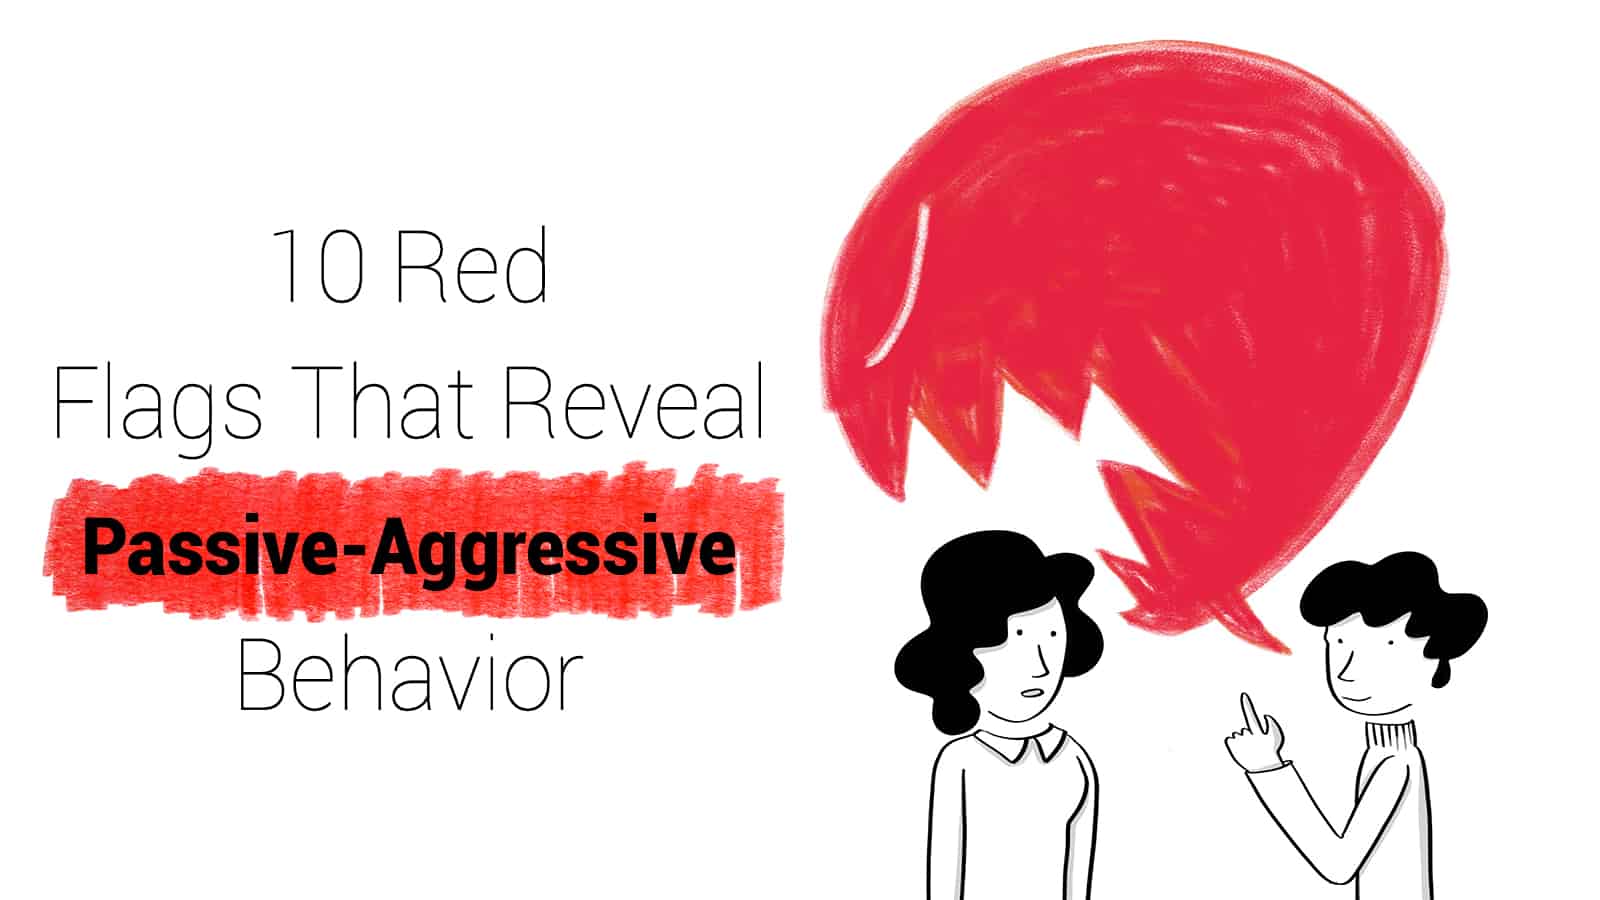 10 Red Flags That Reveal Passive-Aggressive Behavior